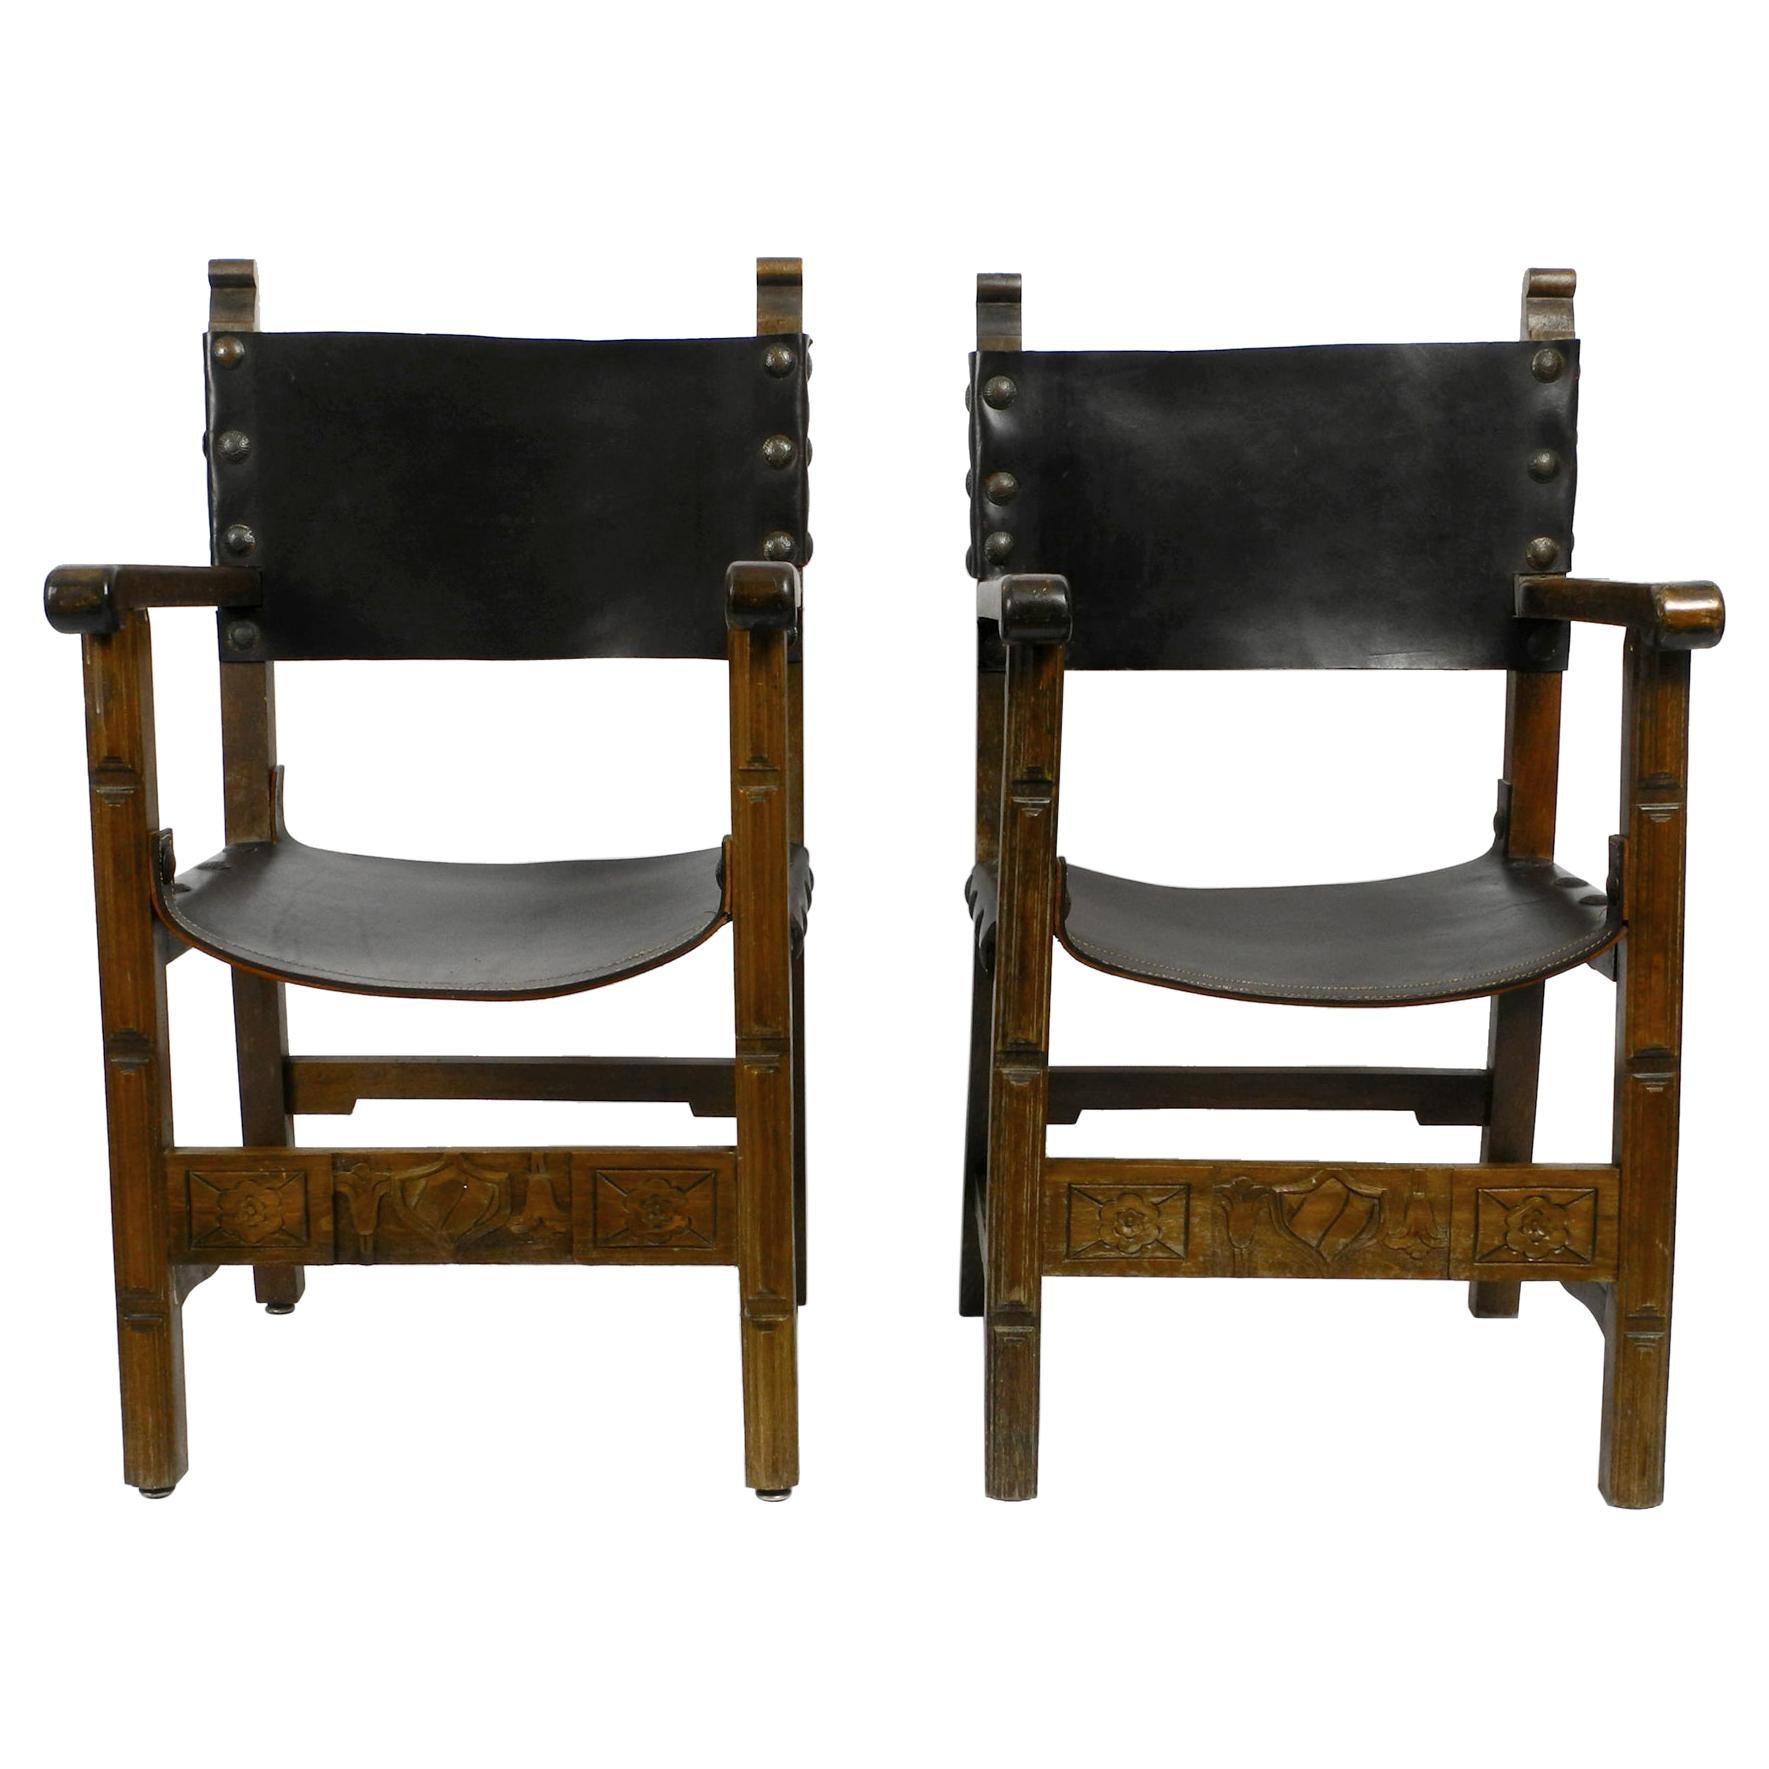 Two Large Spanish 1930s Knights Armchairs Made of Solid Wood and Core Leather